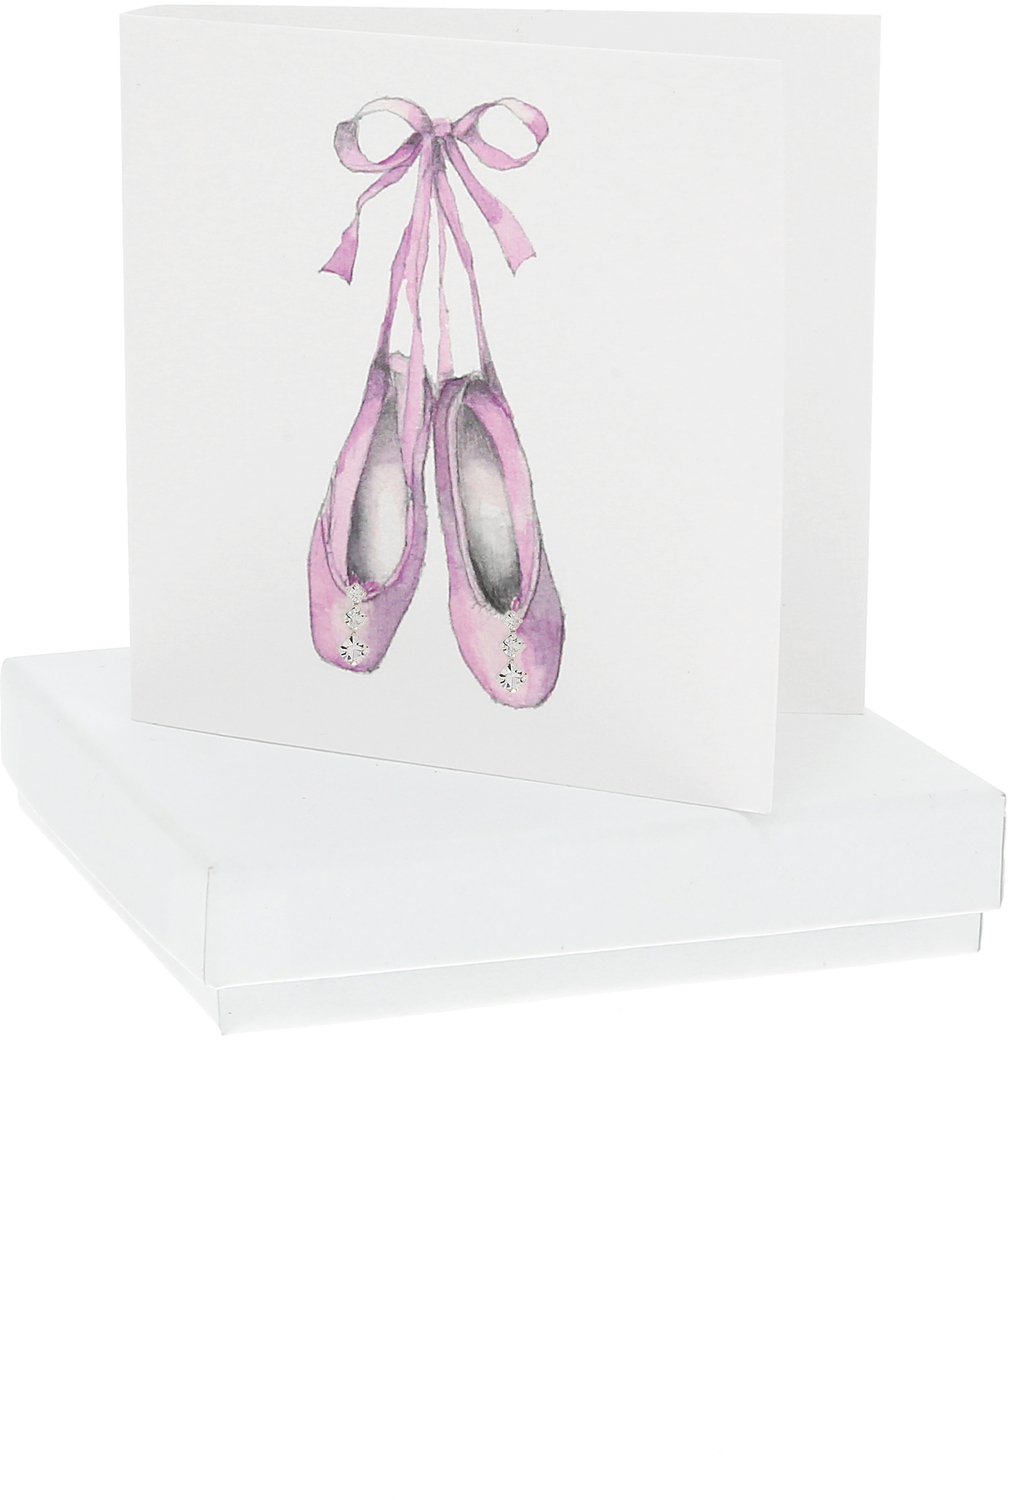 Ballet Shoes by Crumble and Core - Ballet Shoes - 10mm Sterling Silver Cubic Zirconia Drop Earrings